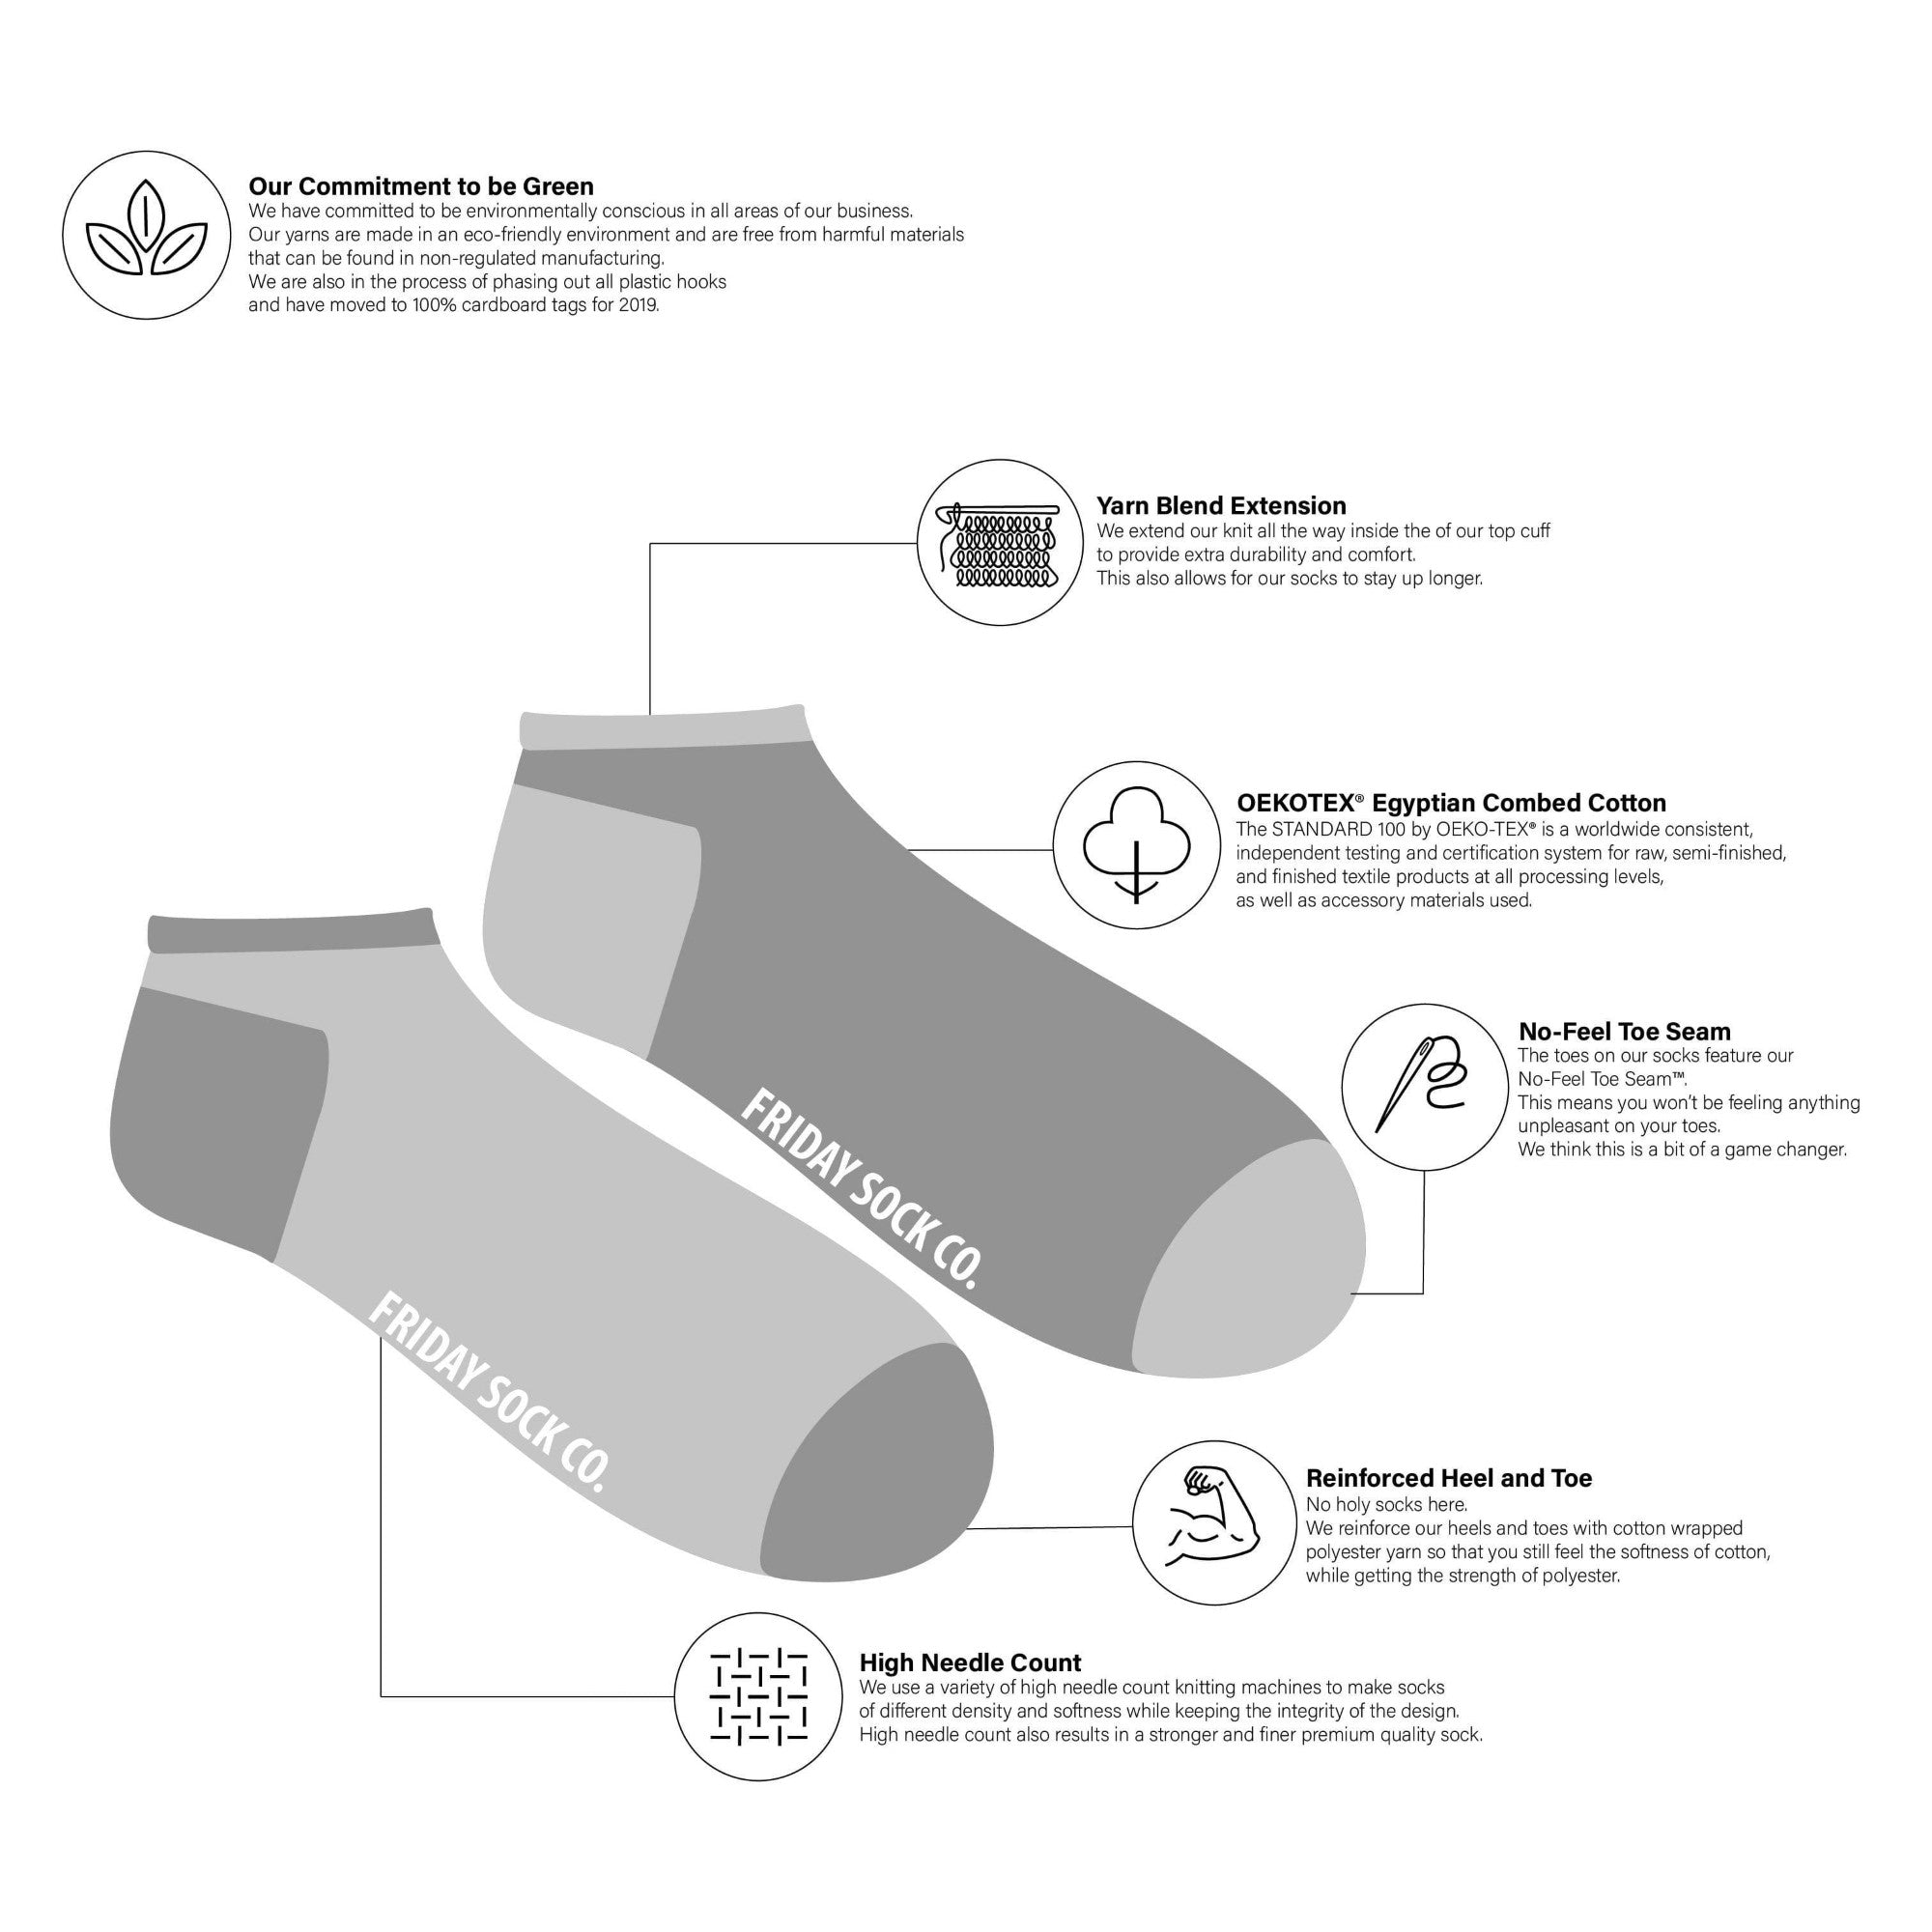 Friday Sock Co. ankle sock specifications